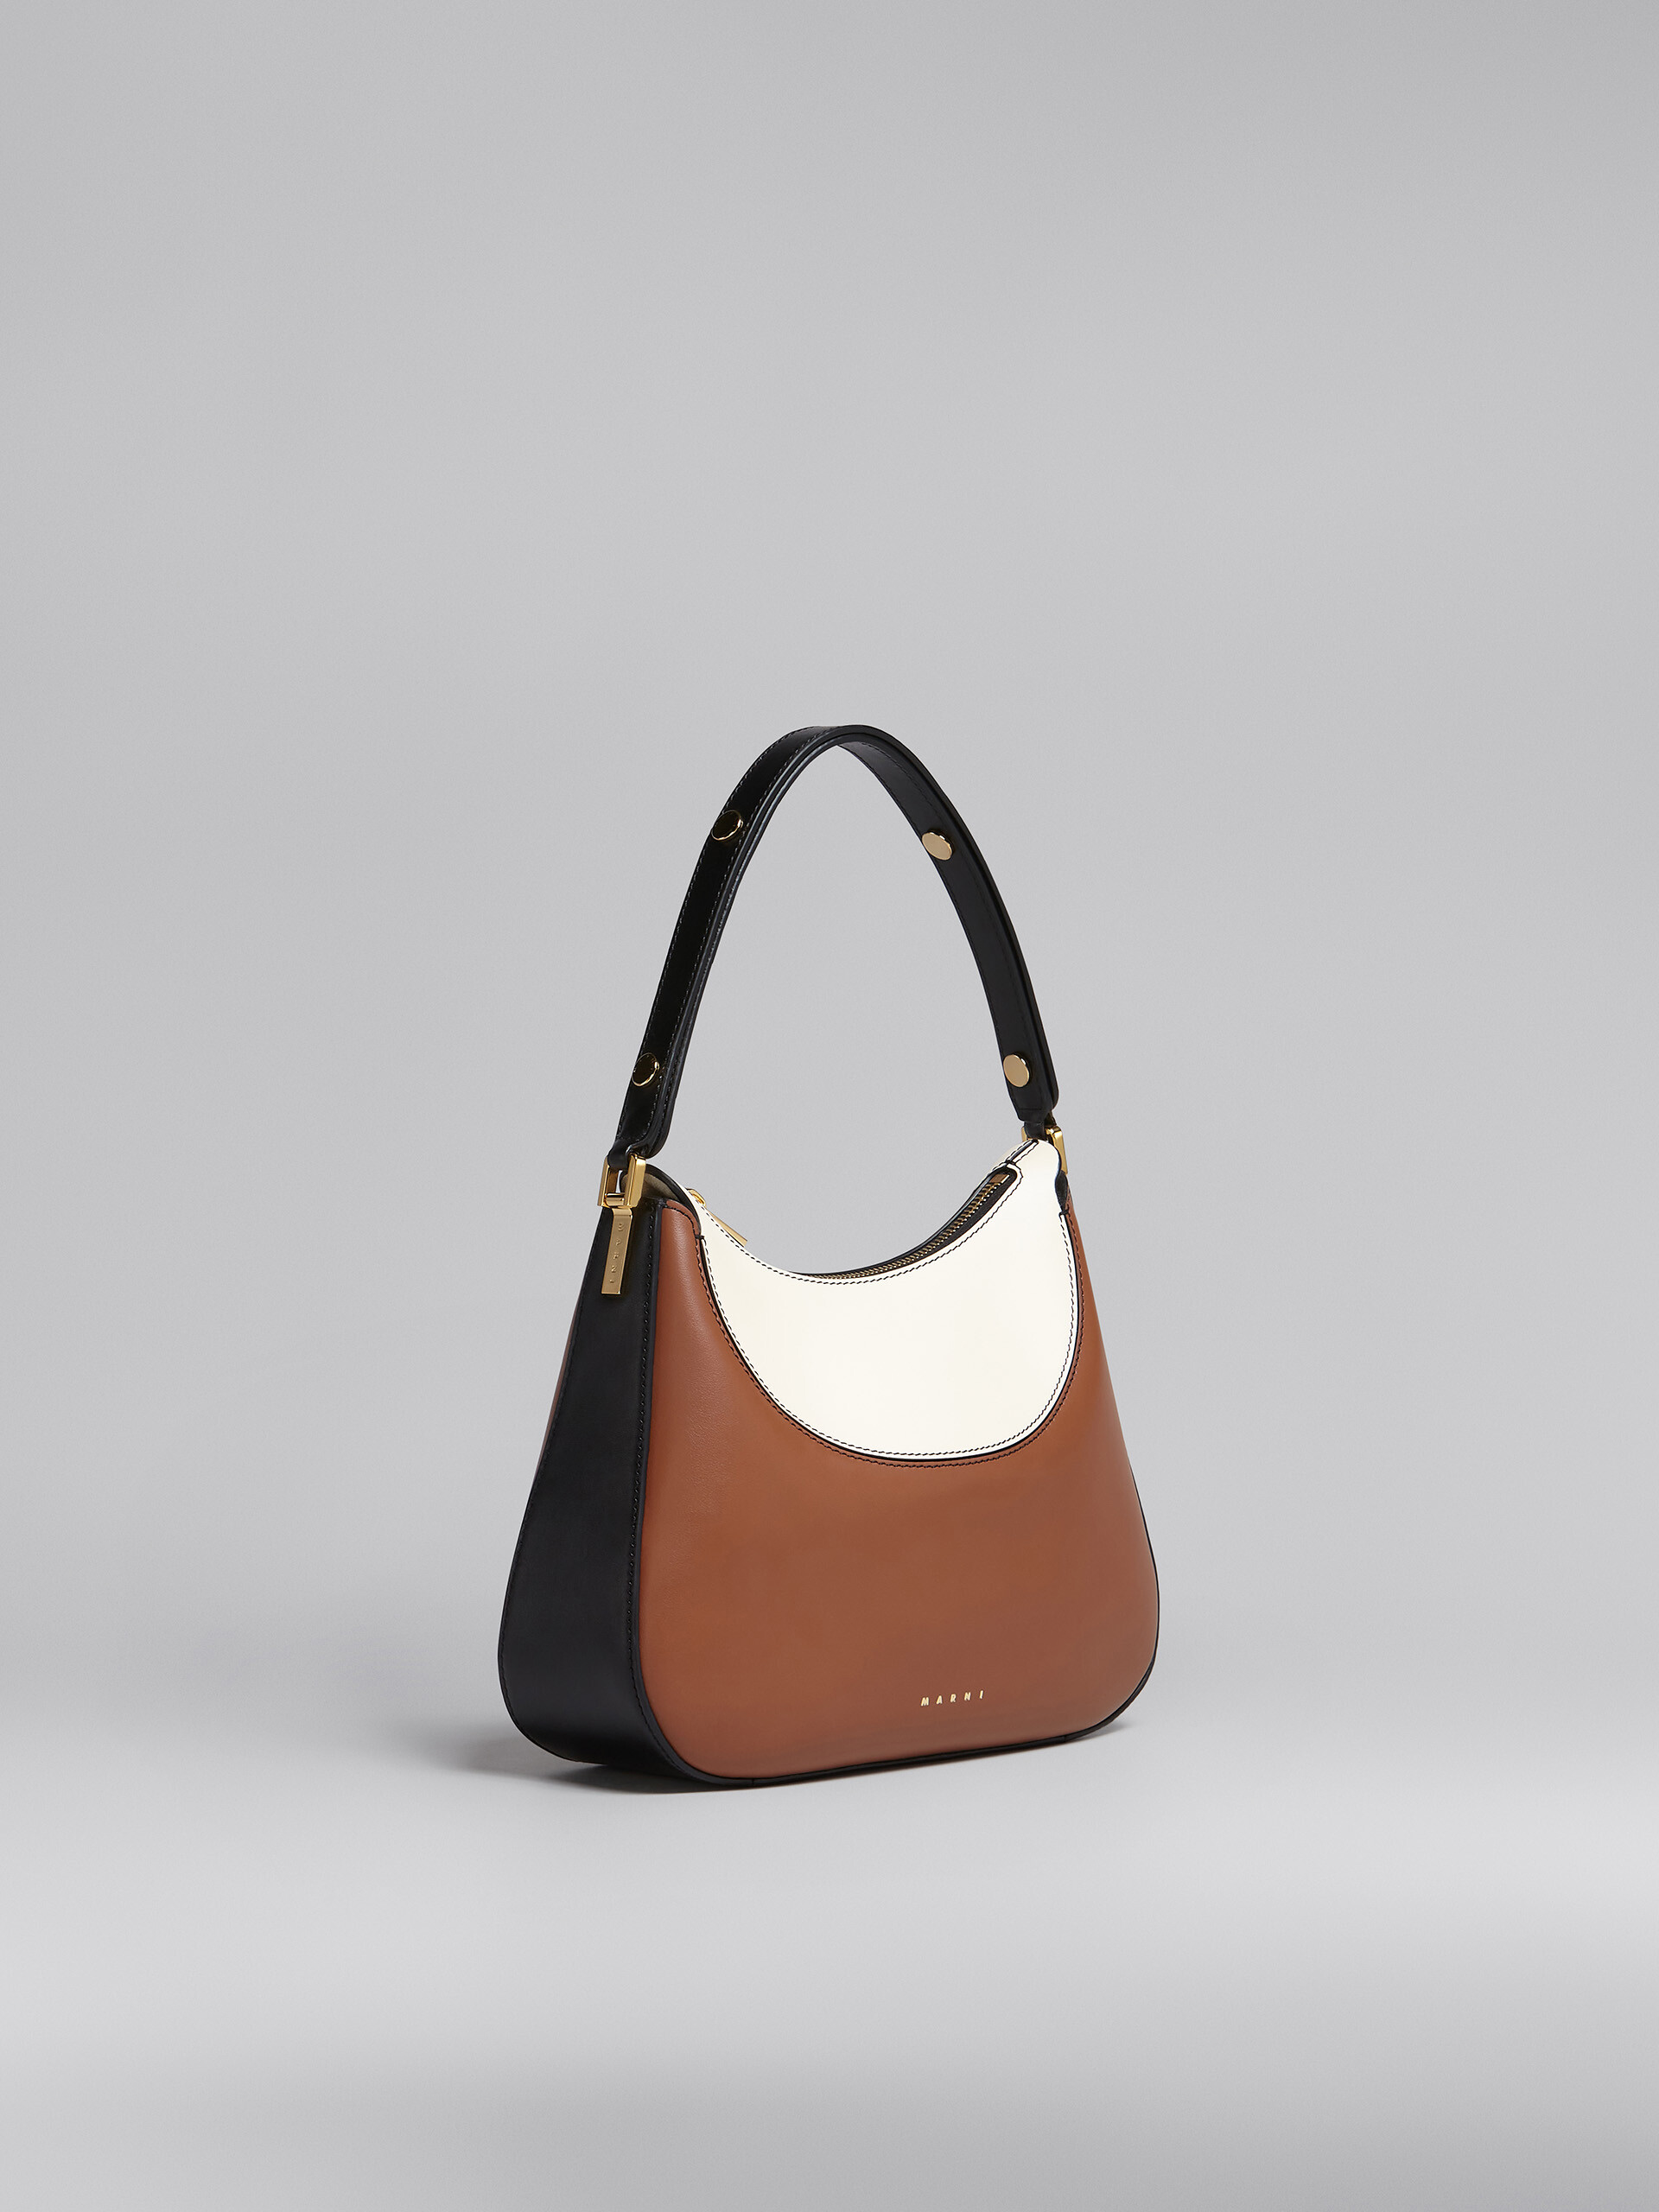 Milano small bag in brown black and white - Handbags - Image 6